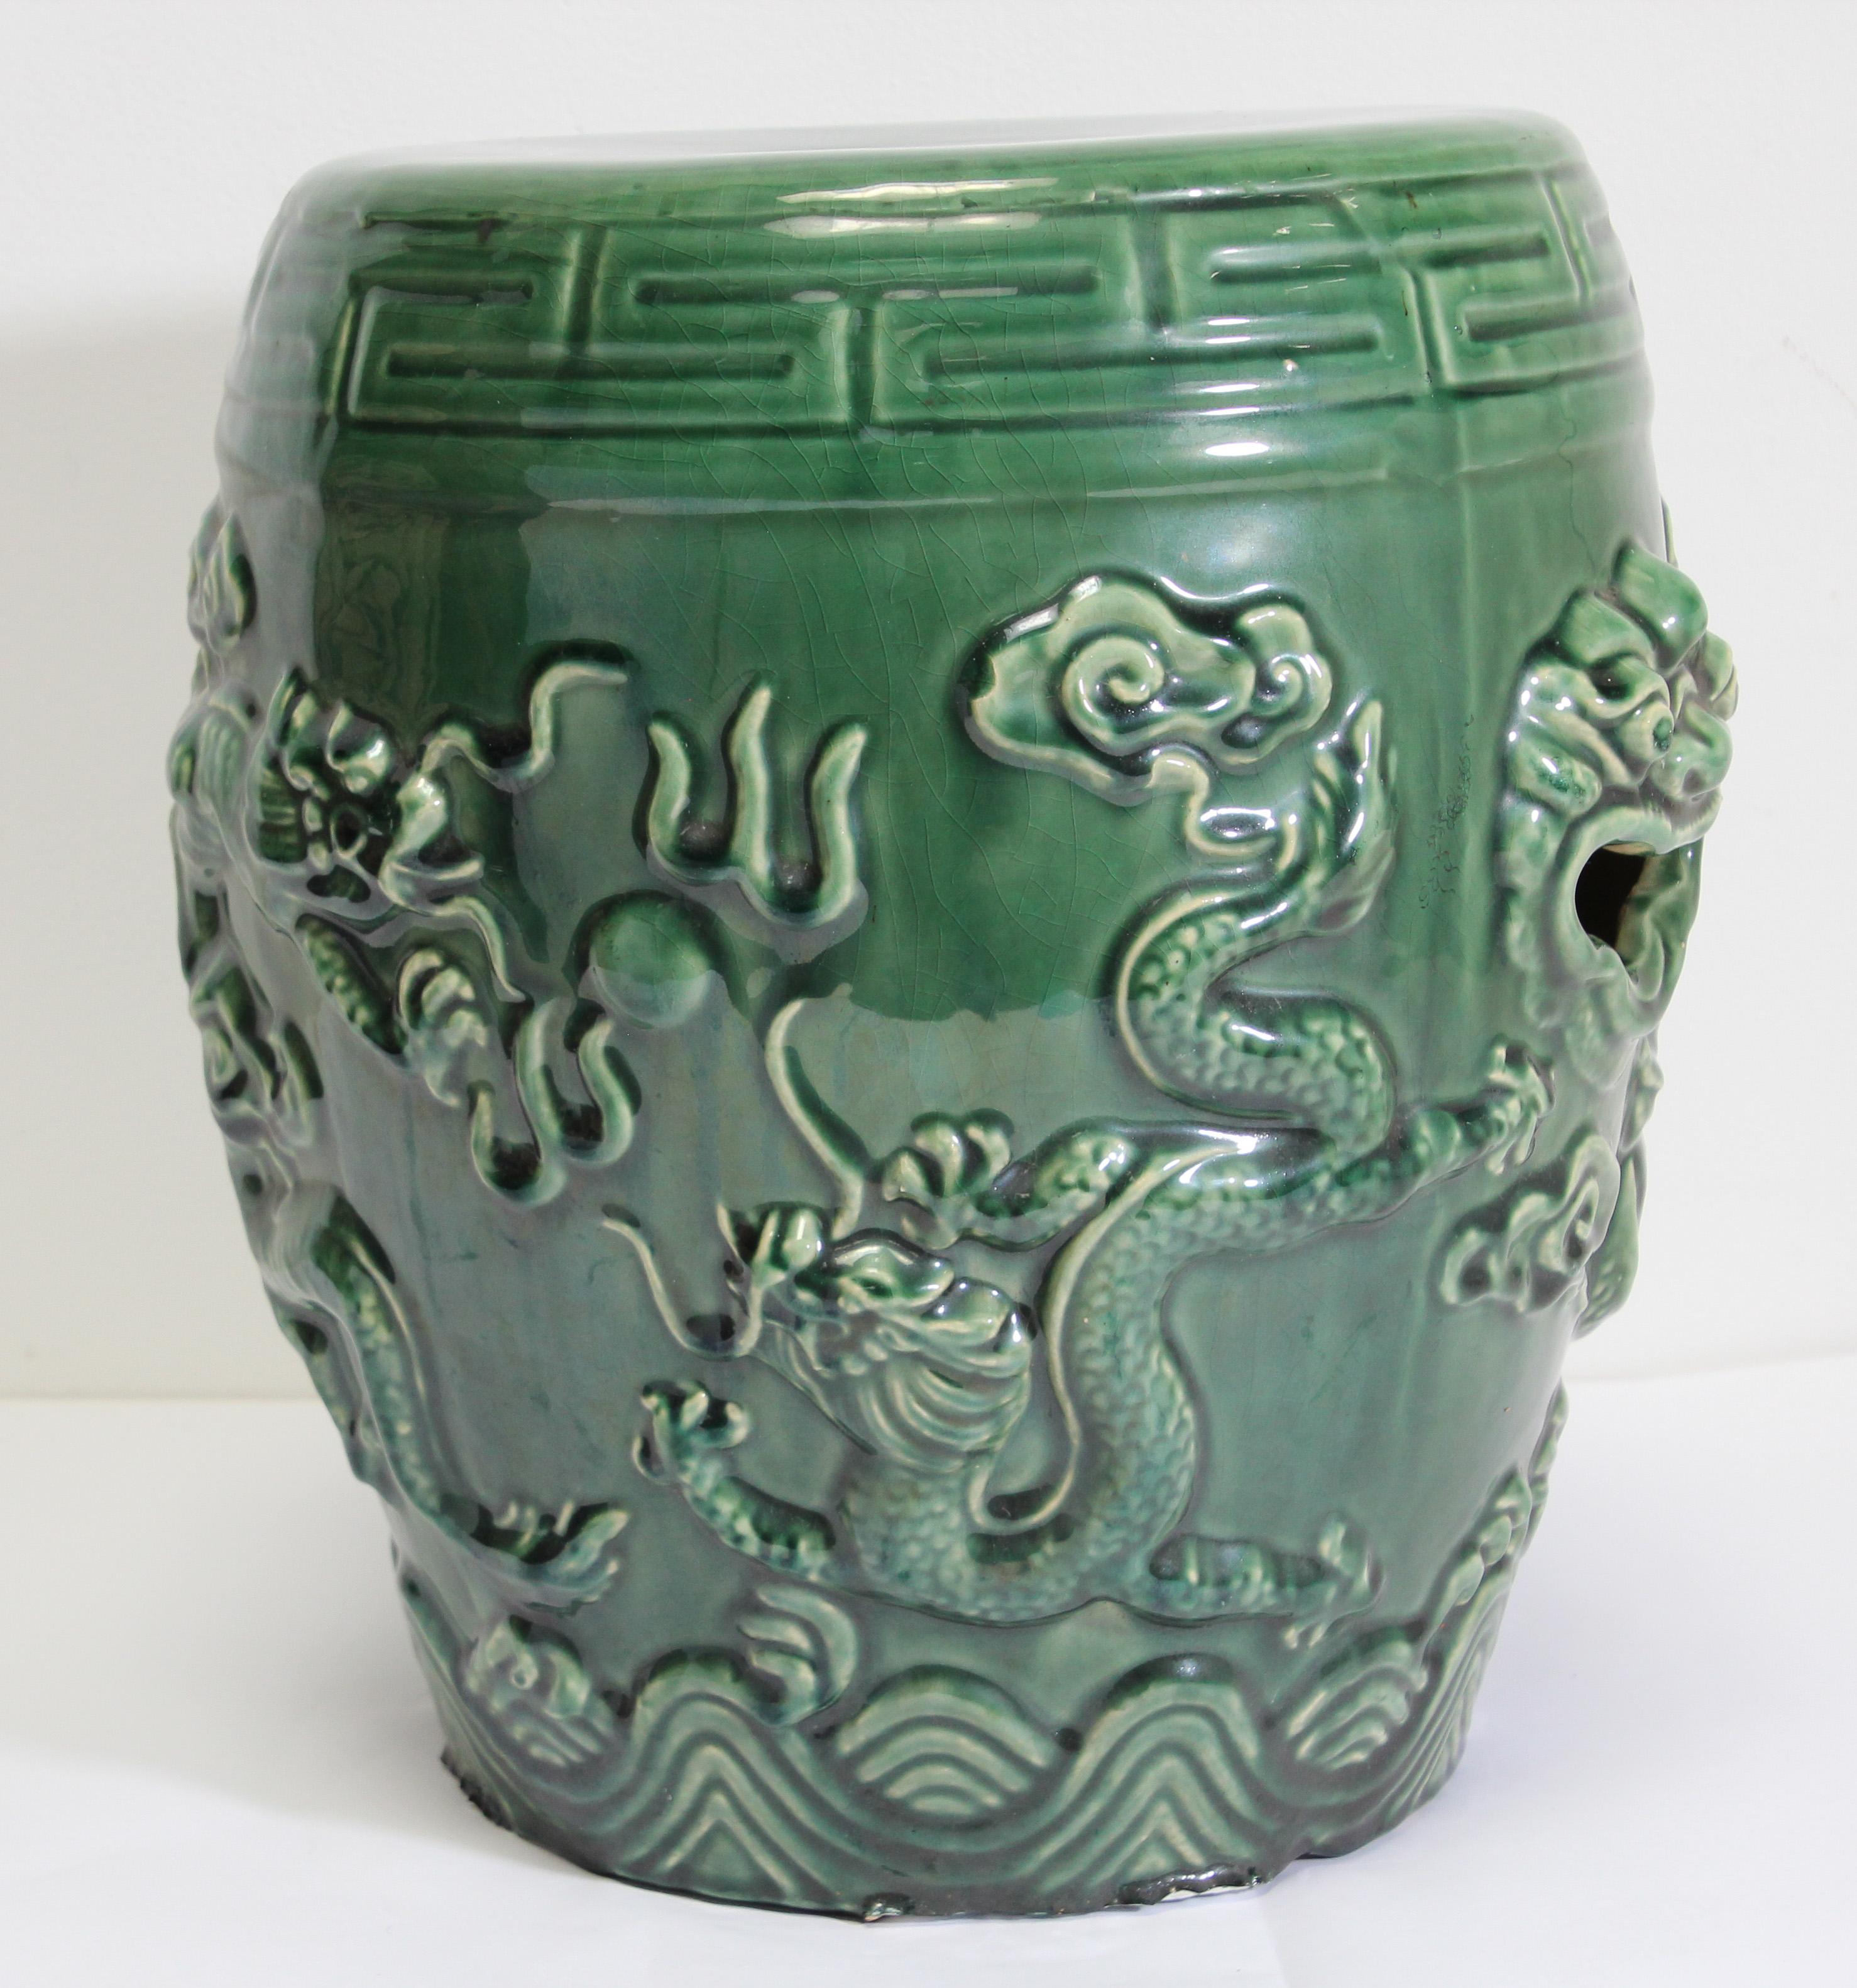 Emerald Green Chinese Ceramic Garden Stool with Dragons 4